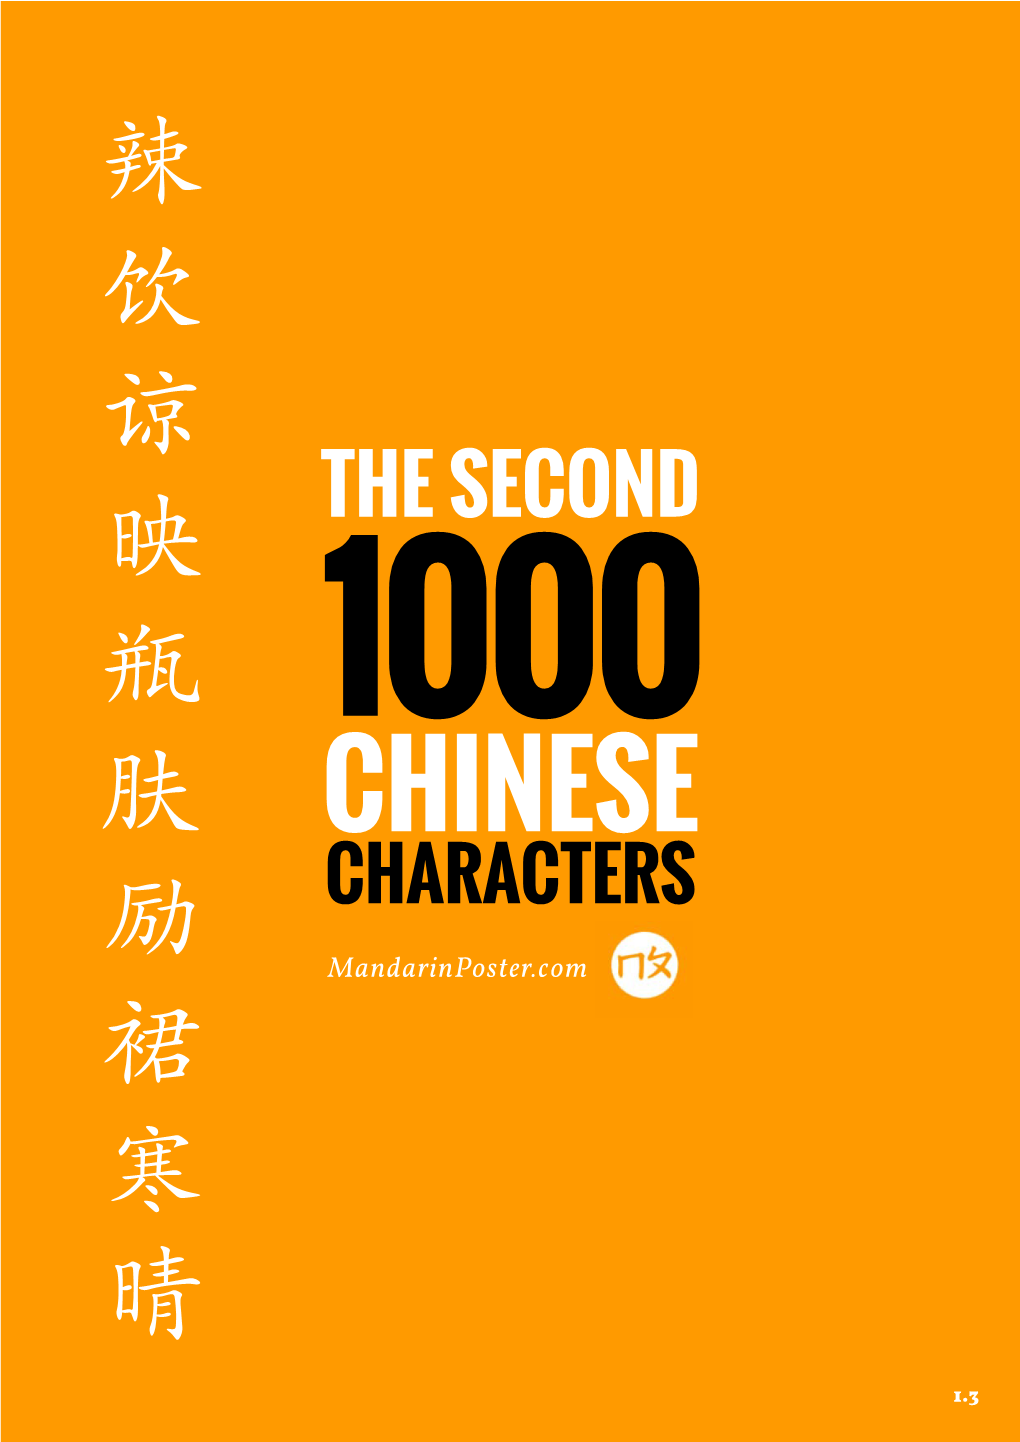 The Second 1000 Chinese Characters